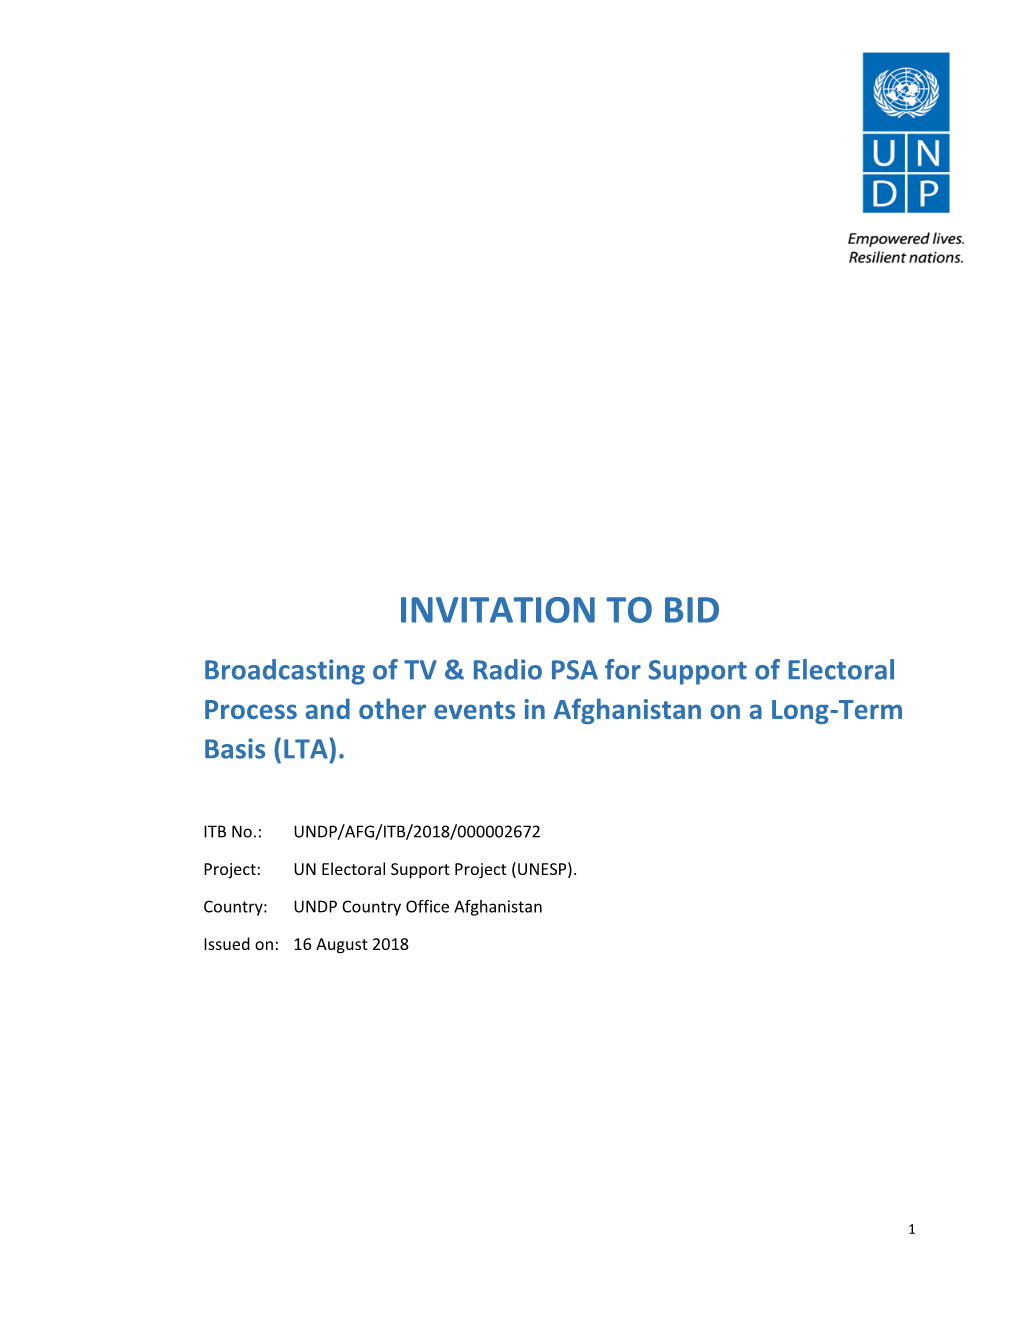 INVITATION to BID Broadcasting of TV & Radio PSA for Support of Electoral Process and Other Events in Afghanistan on a Long-Term Basis (LTA)